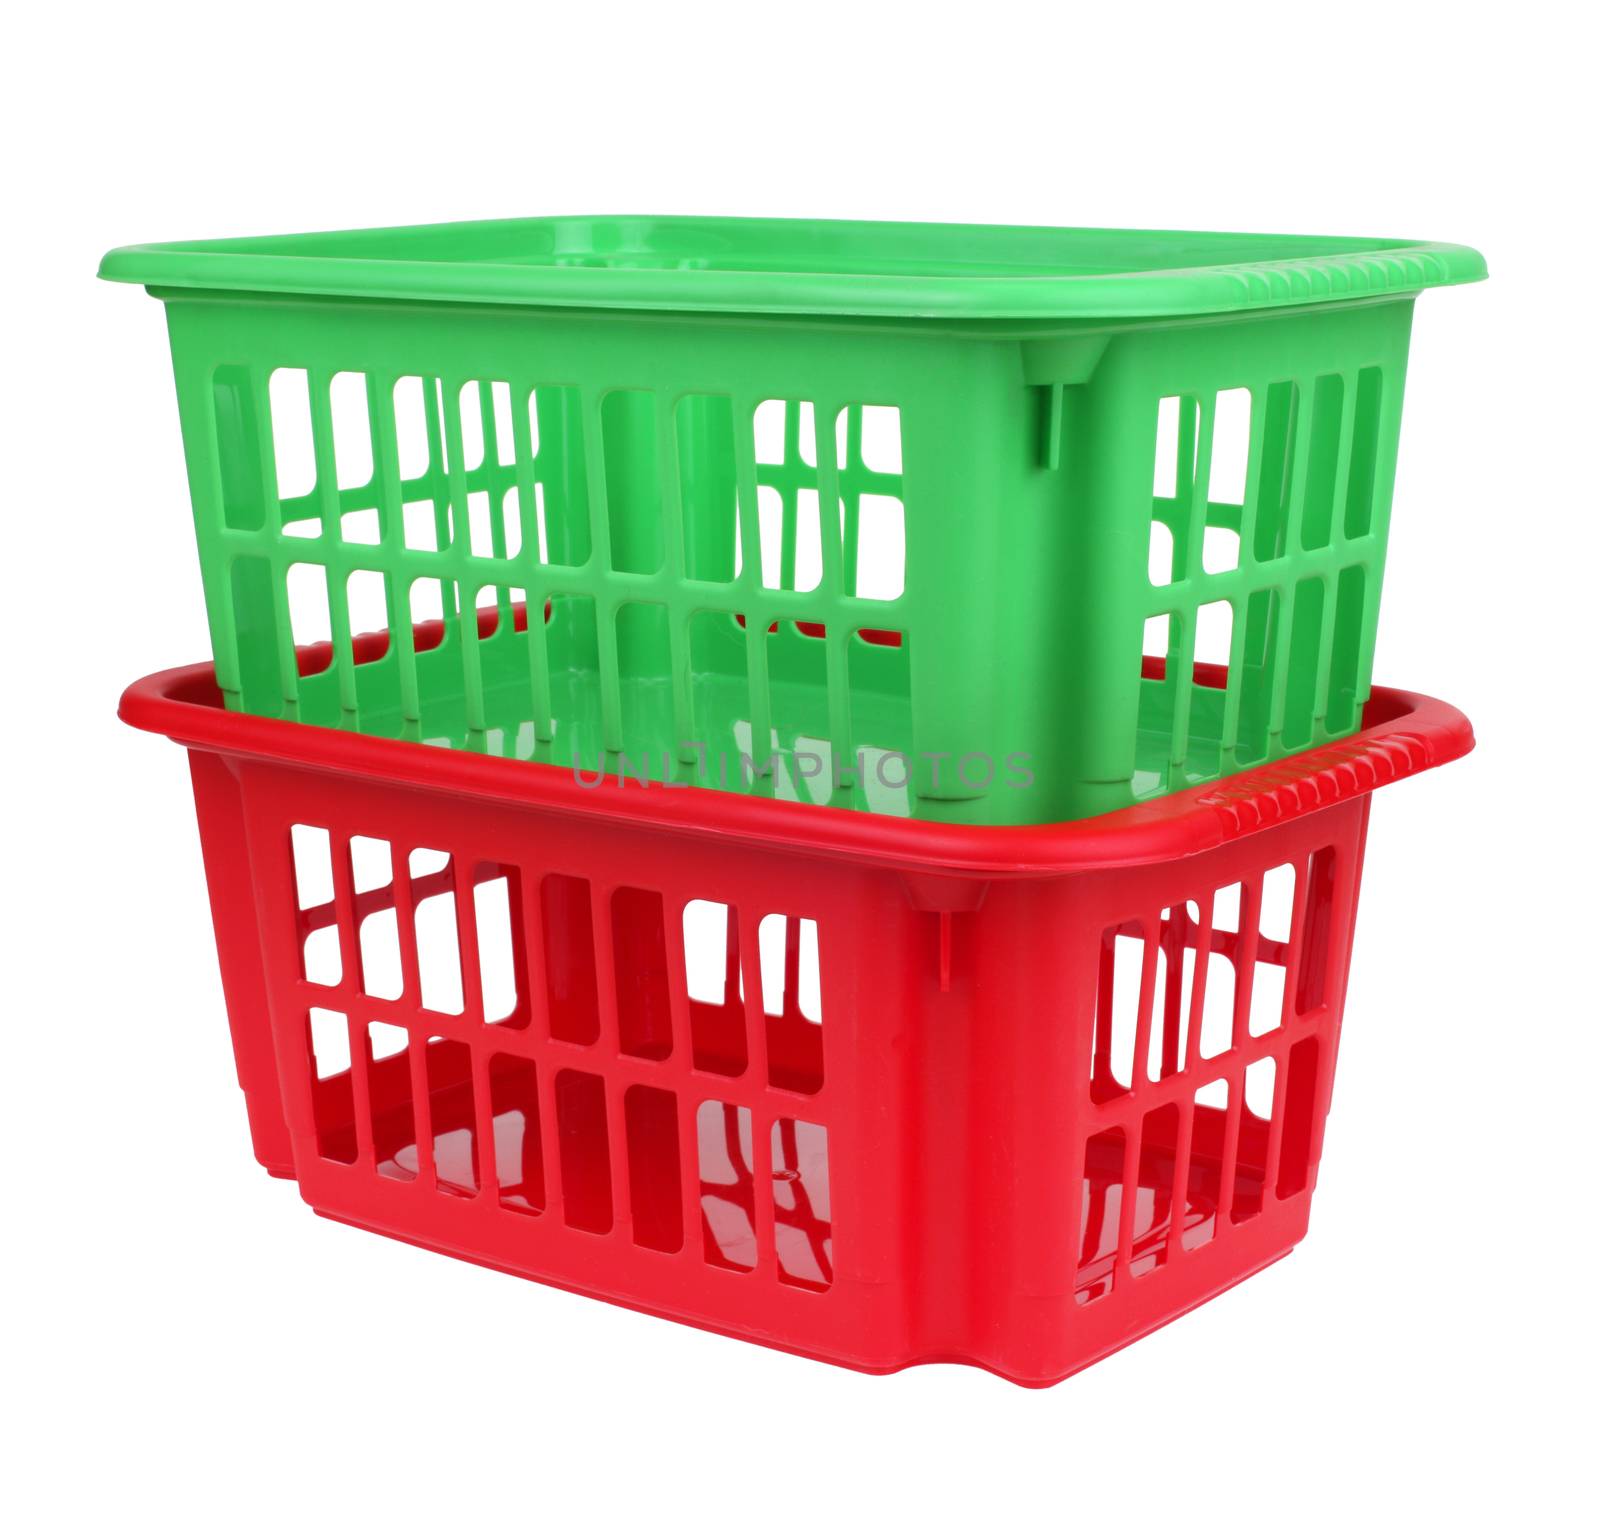 empty red and green plastic basket isolated on white by rudchenko